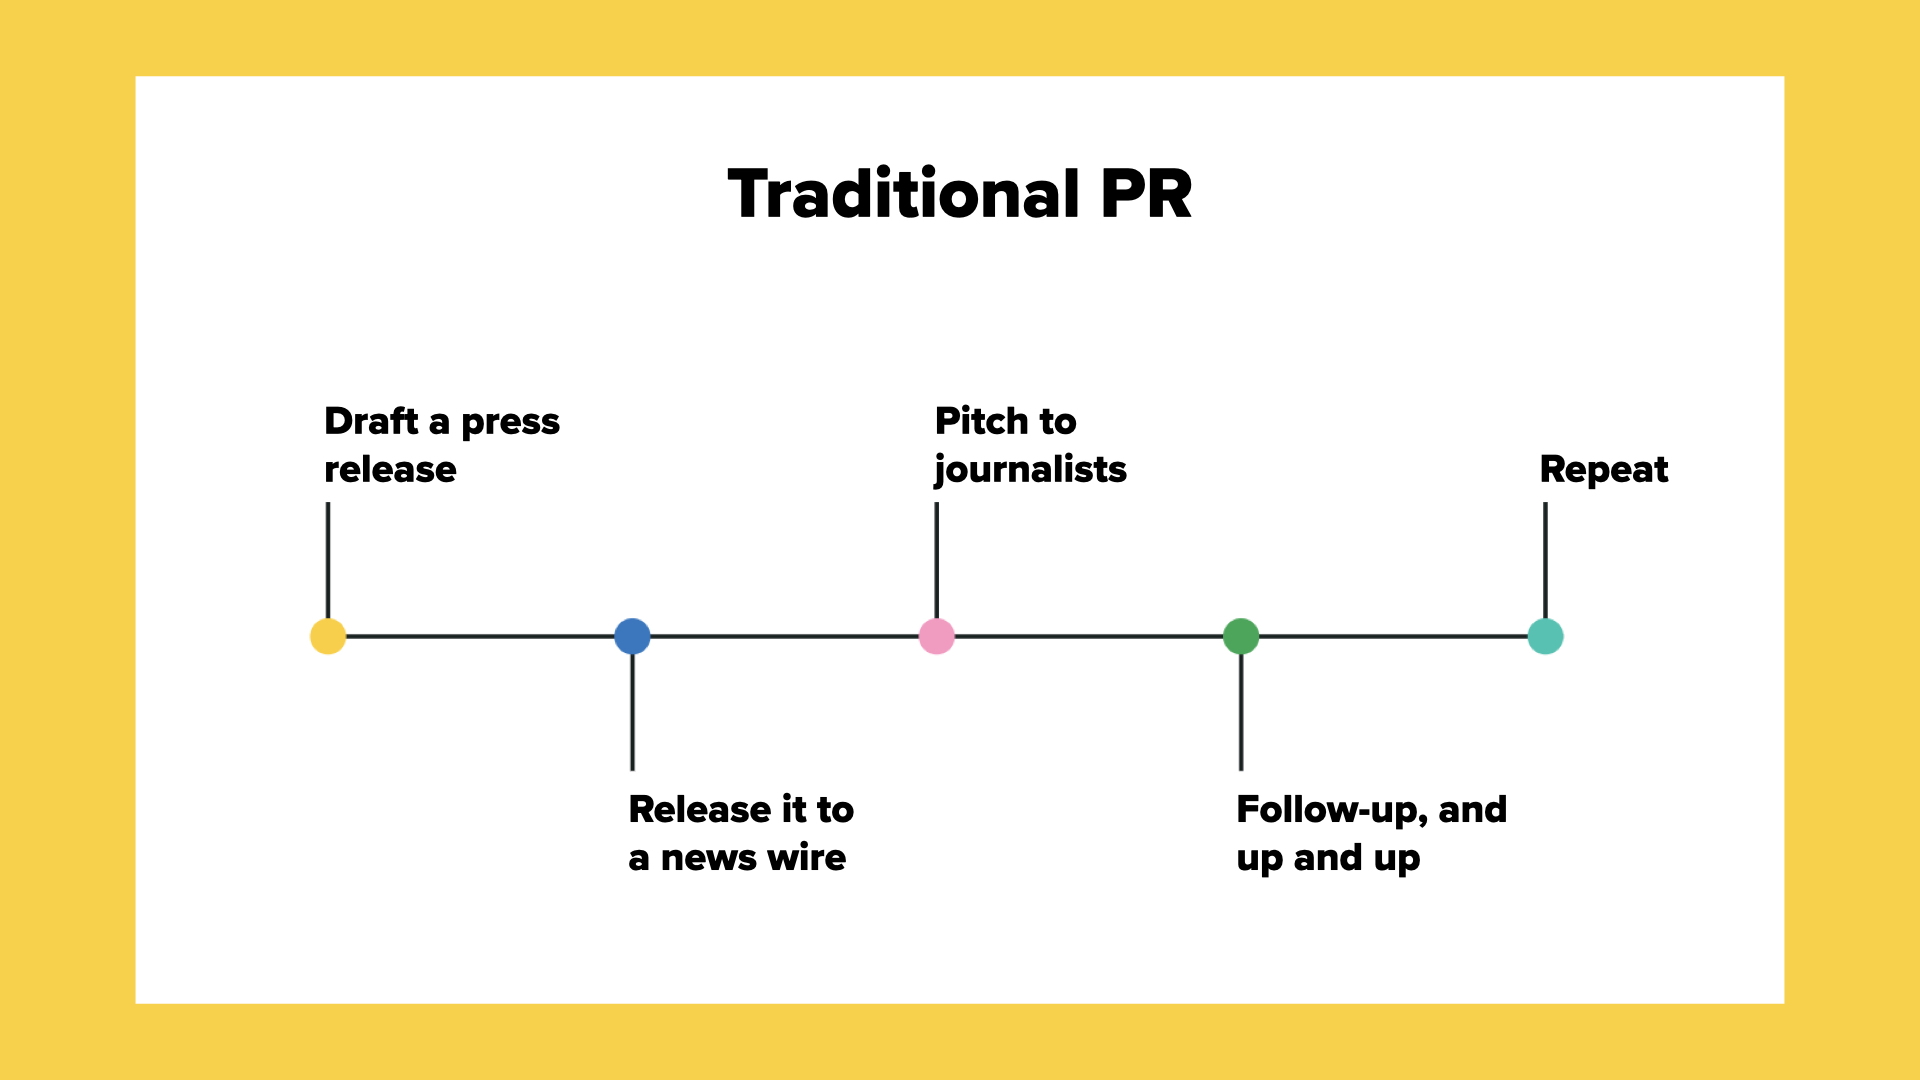 A Timeline of the traditional public relations cycle: draft a press release, release it to a news wire, pitch to journalists, follow up, repeat.